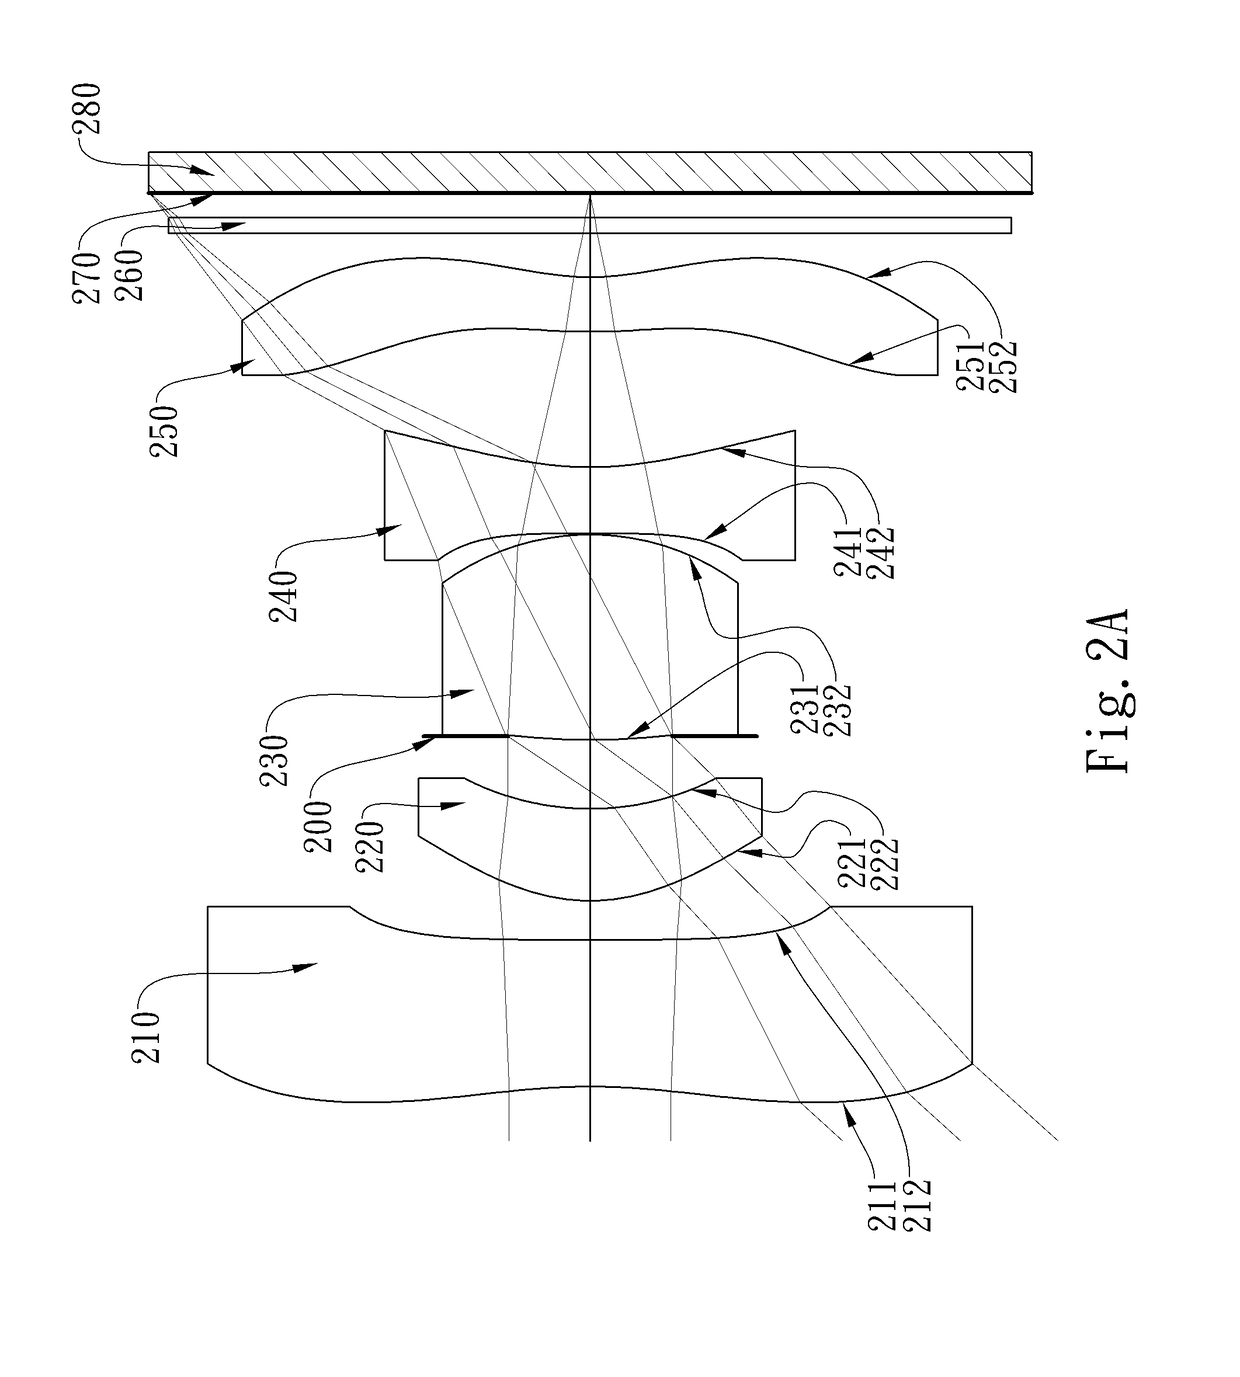 Optical image capturing system, imaging apparatus and electronic device